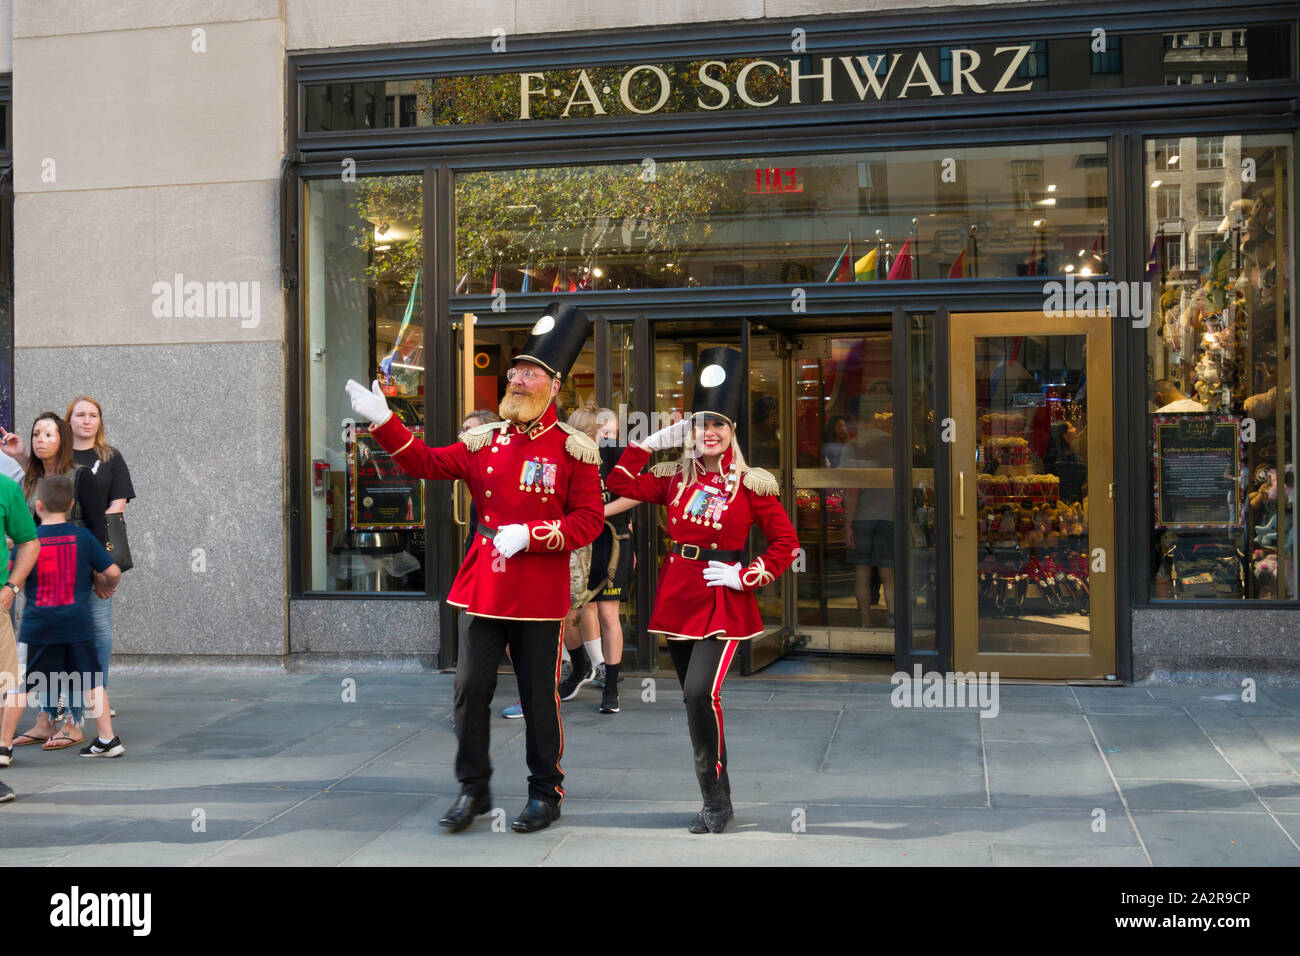 FAO Schwarz is a famous American Toy Store, Rockefeller Center, New York City, USA Stock Photo